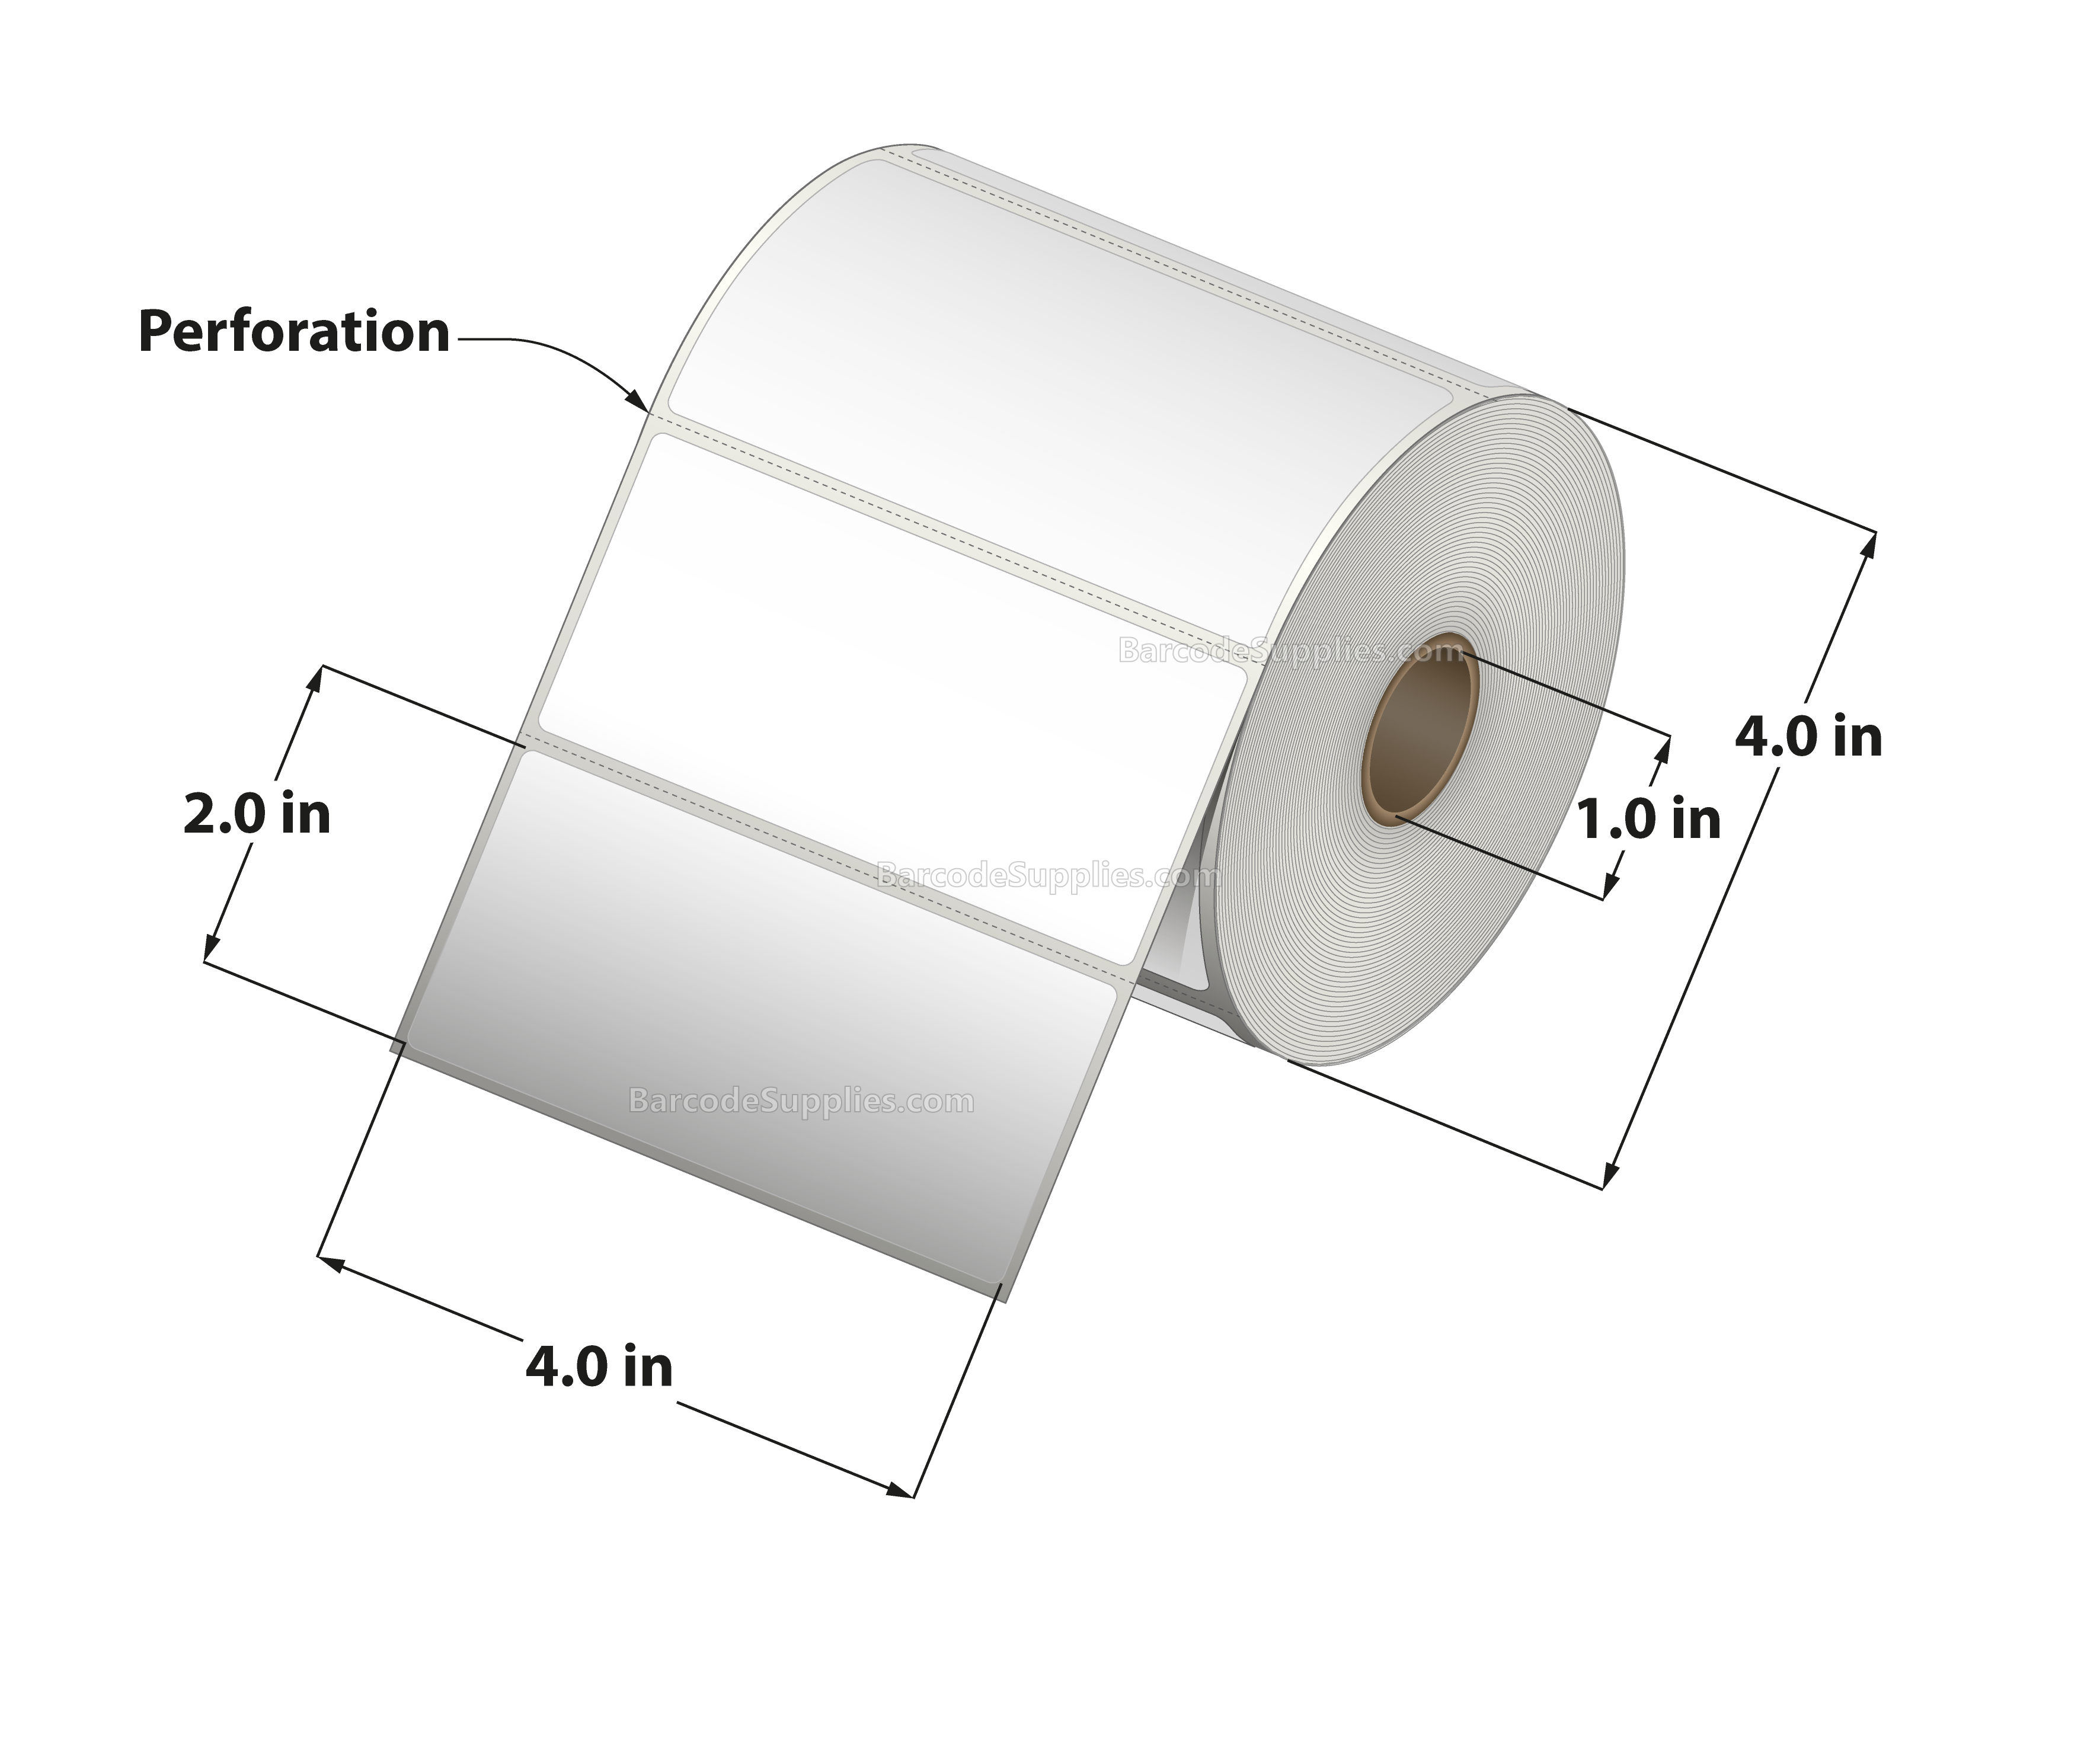 4 x 2 Thermal Transfer White Labels With Permanent Adhesive - Perforated - 735 Labels Per Roll - Carton Of 12 Rolls - 8820 Labels Total - MPN: RT-4-2-735-1 - BarcodeSource, Inc.